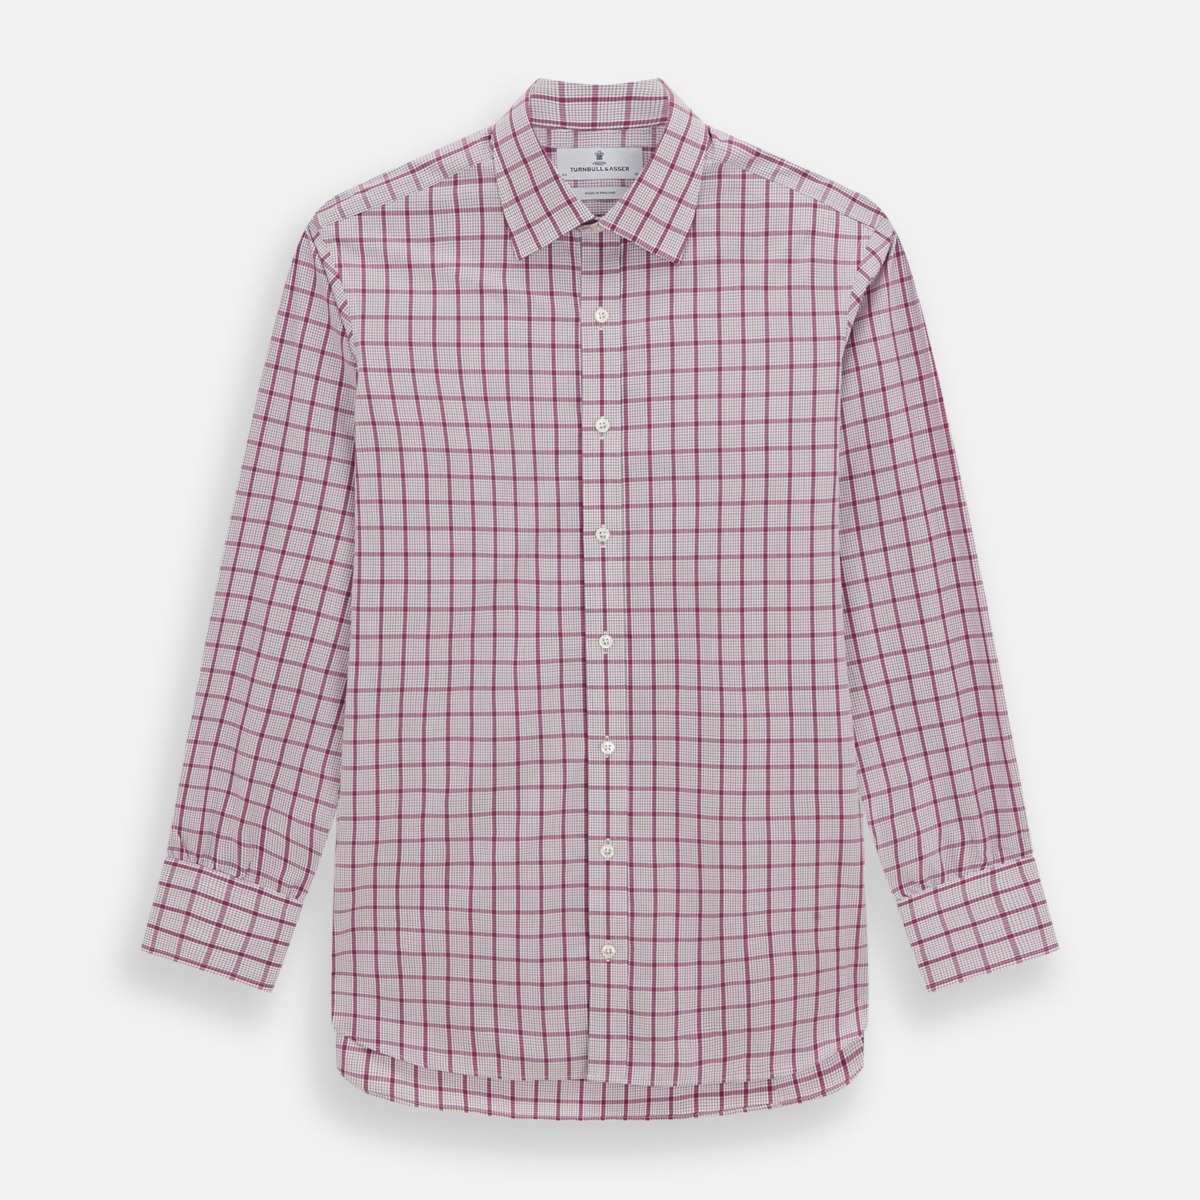 Checked Shirt for Men at Turnbull And Asser GOOFASH